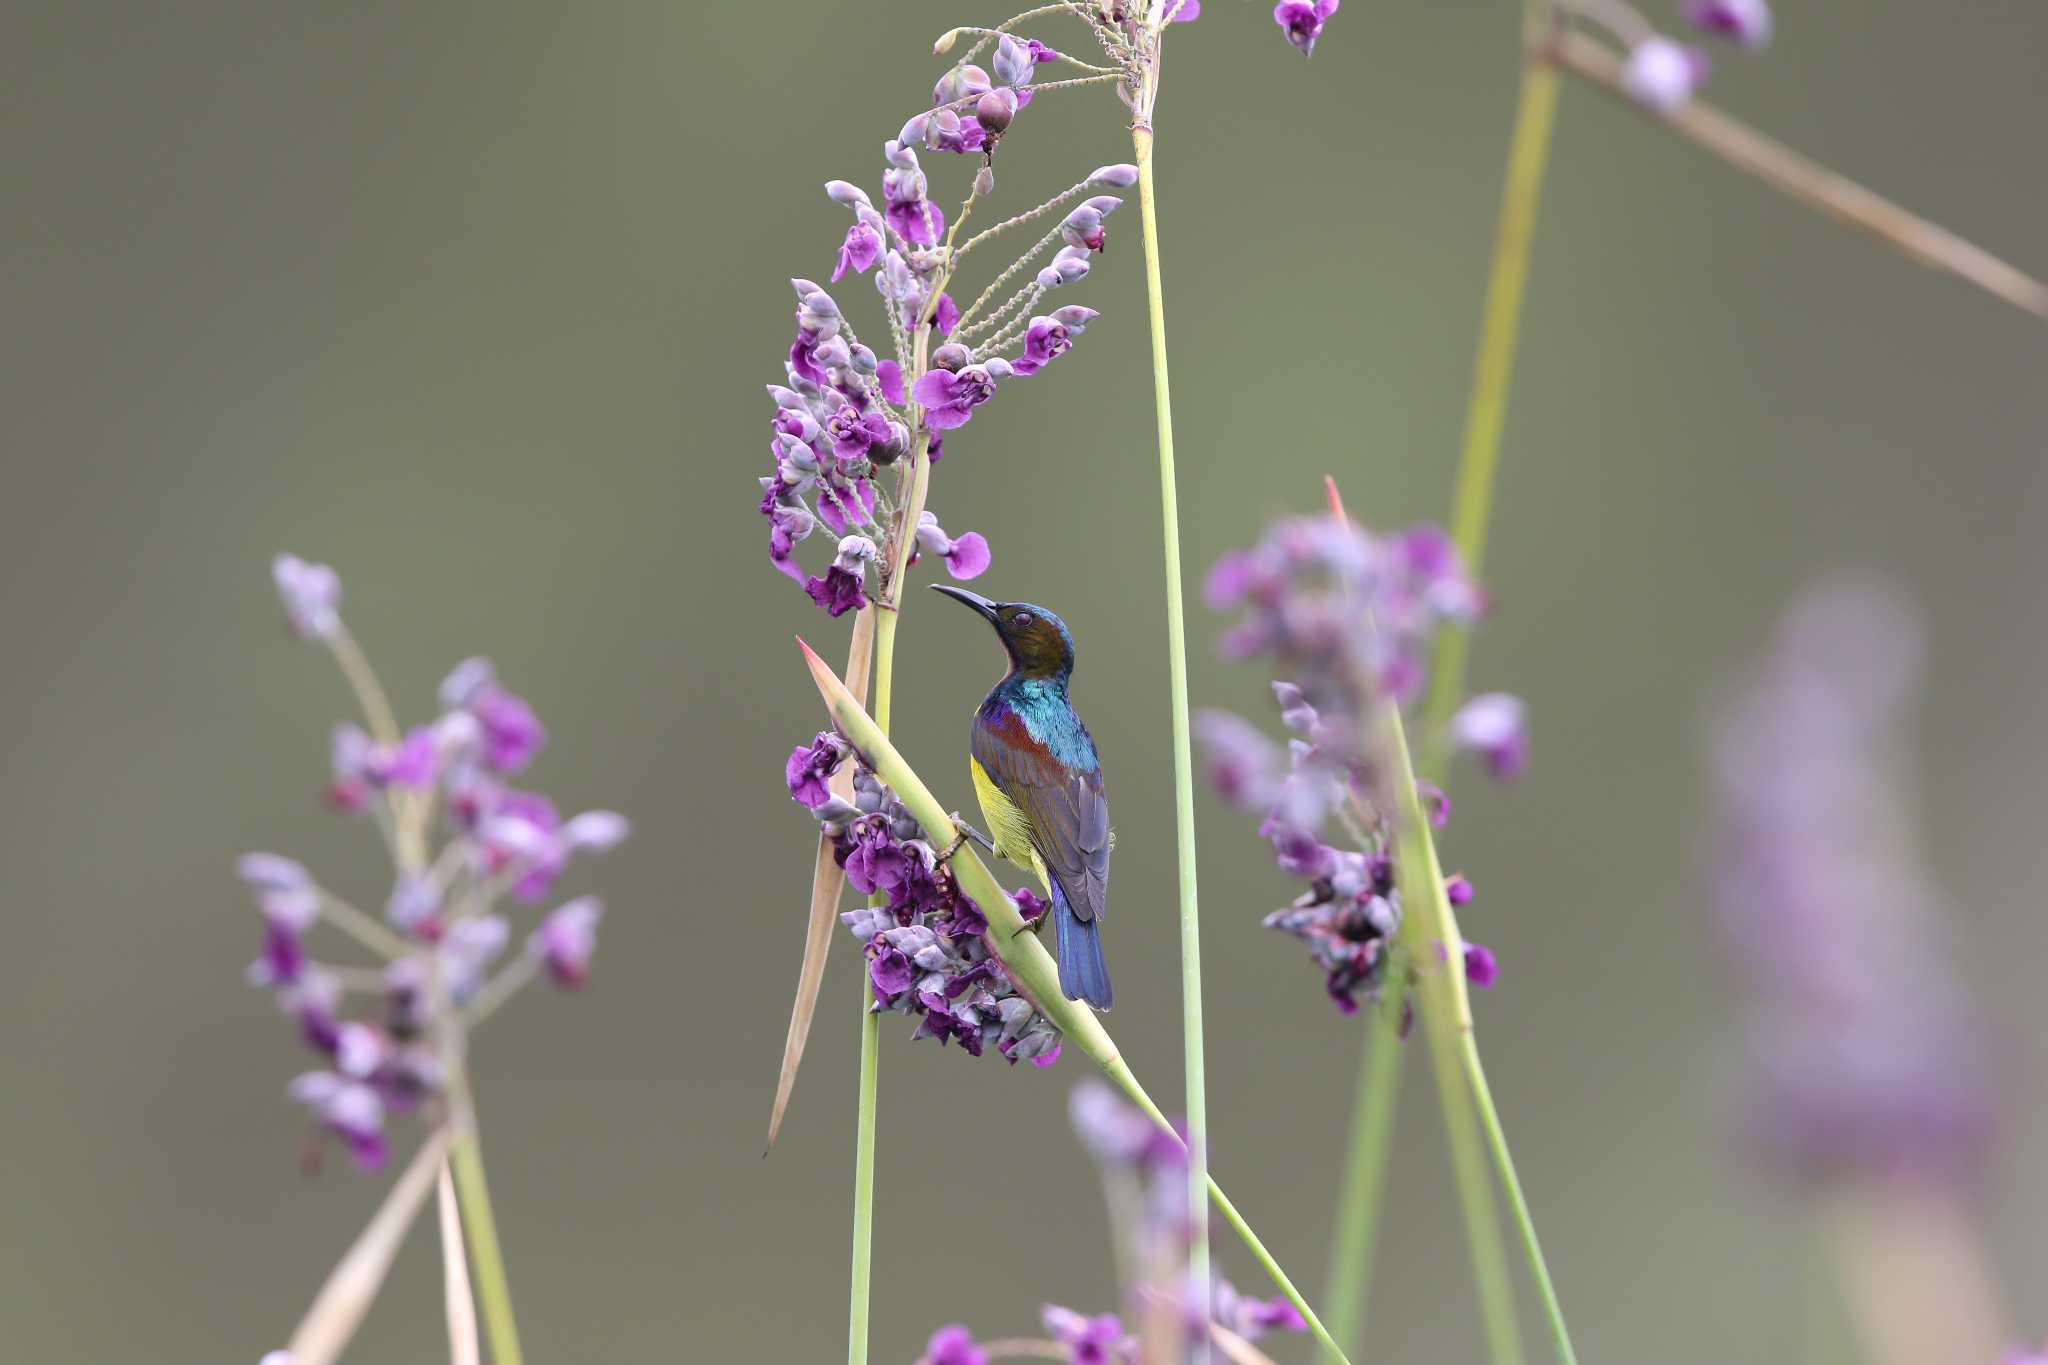 Photo of Brown-throated Sunbird at Chinese garden by Trio